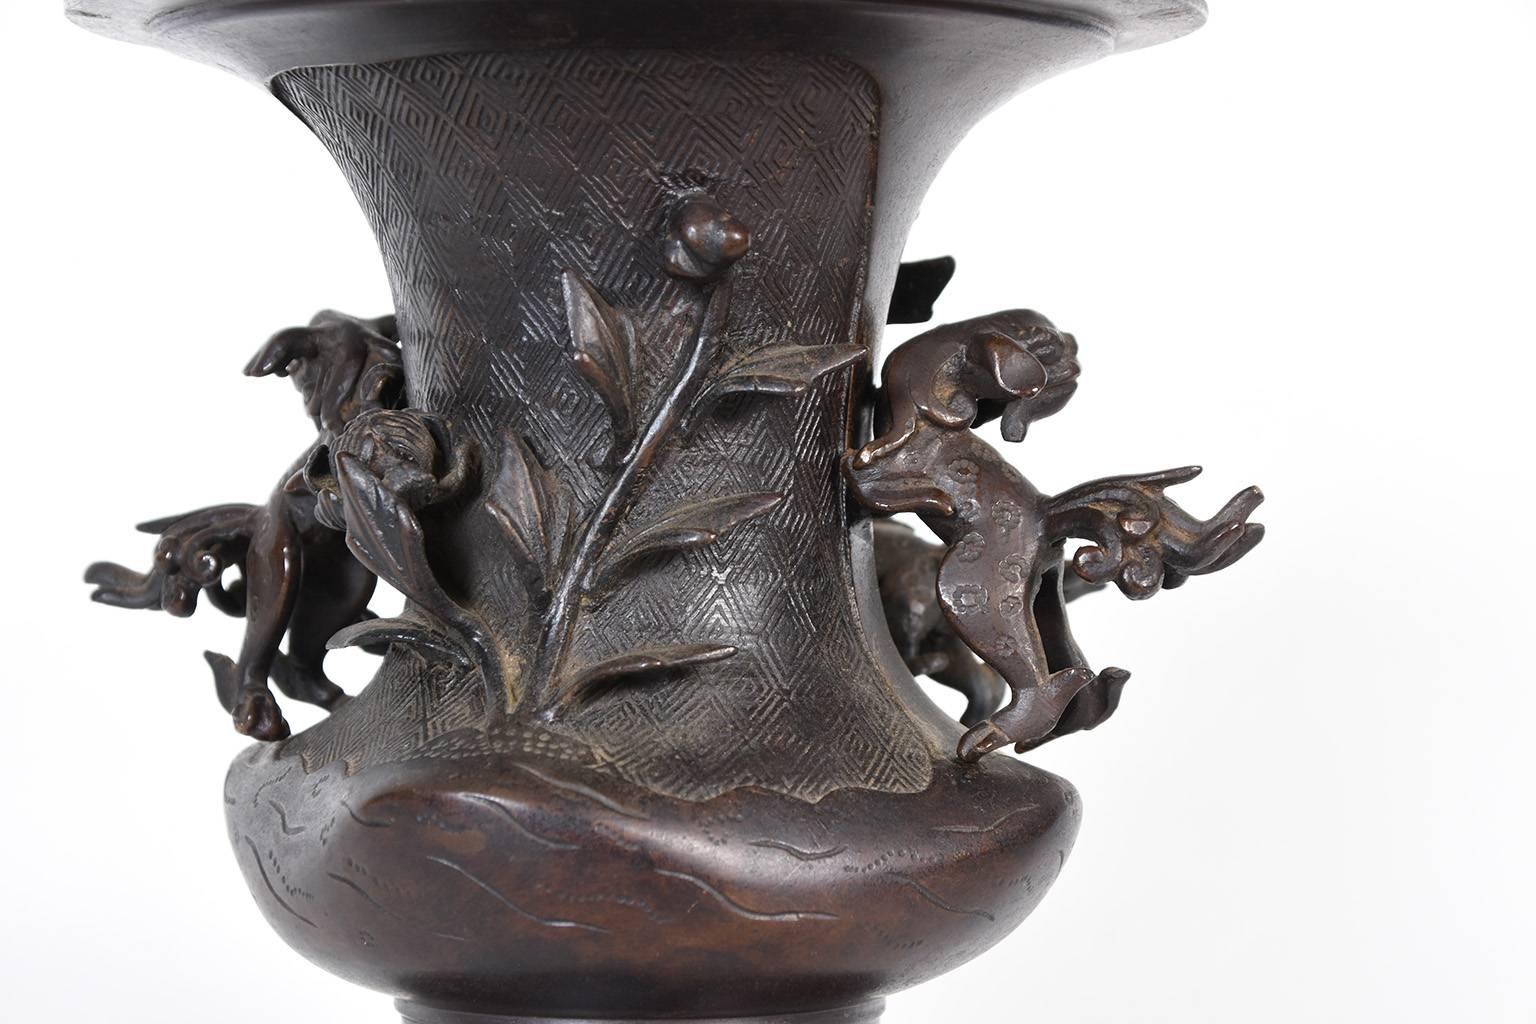 Antique Japanese cast bronze offering vase with removable shi shi handles. There are two additional shi shi dogs playing amongst flora on the front, and a flower stem on the back. The background is filled with an etched geometric diamond